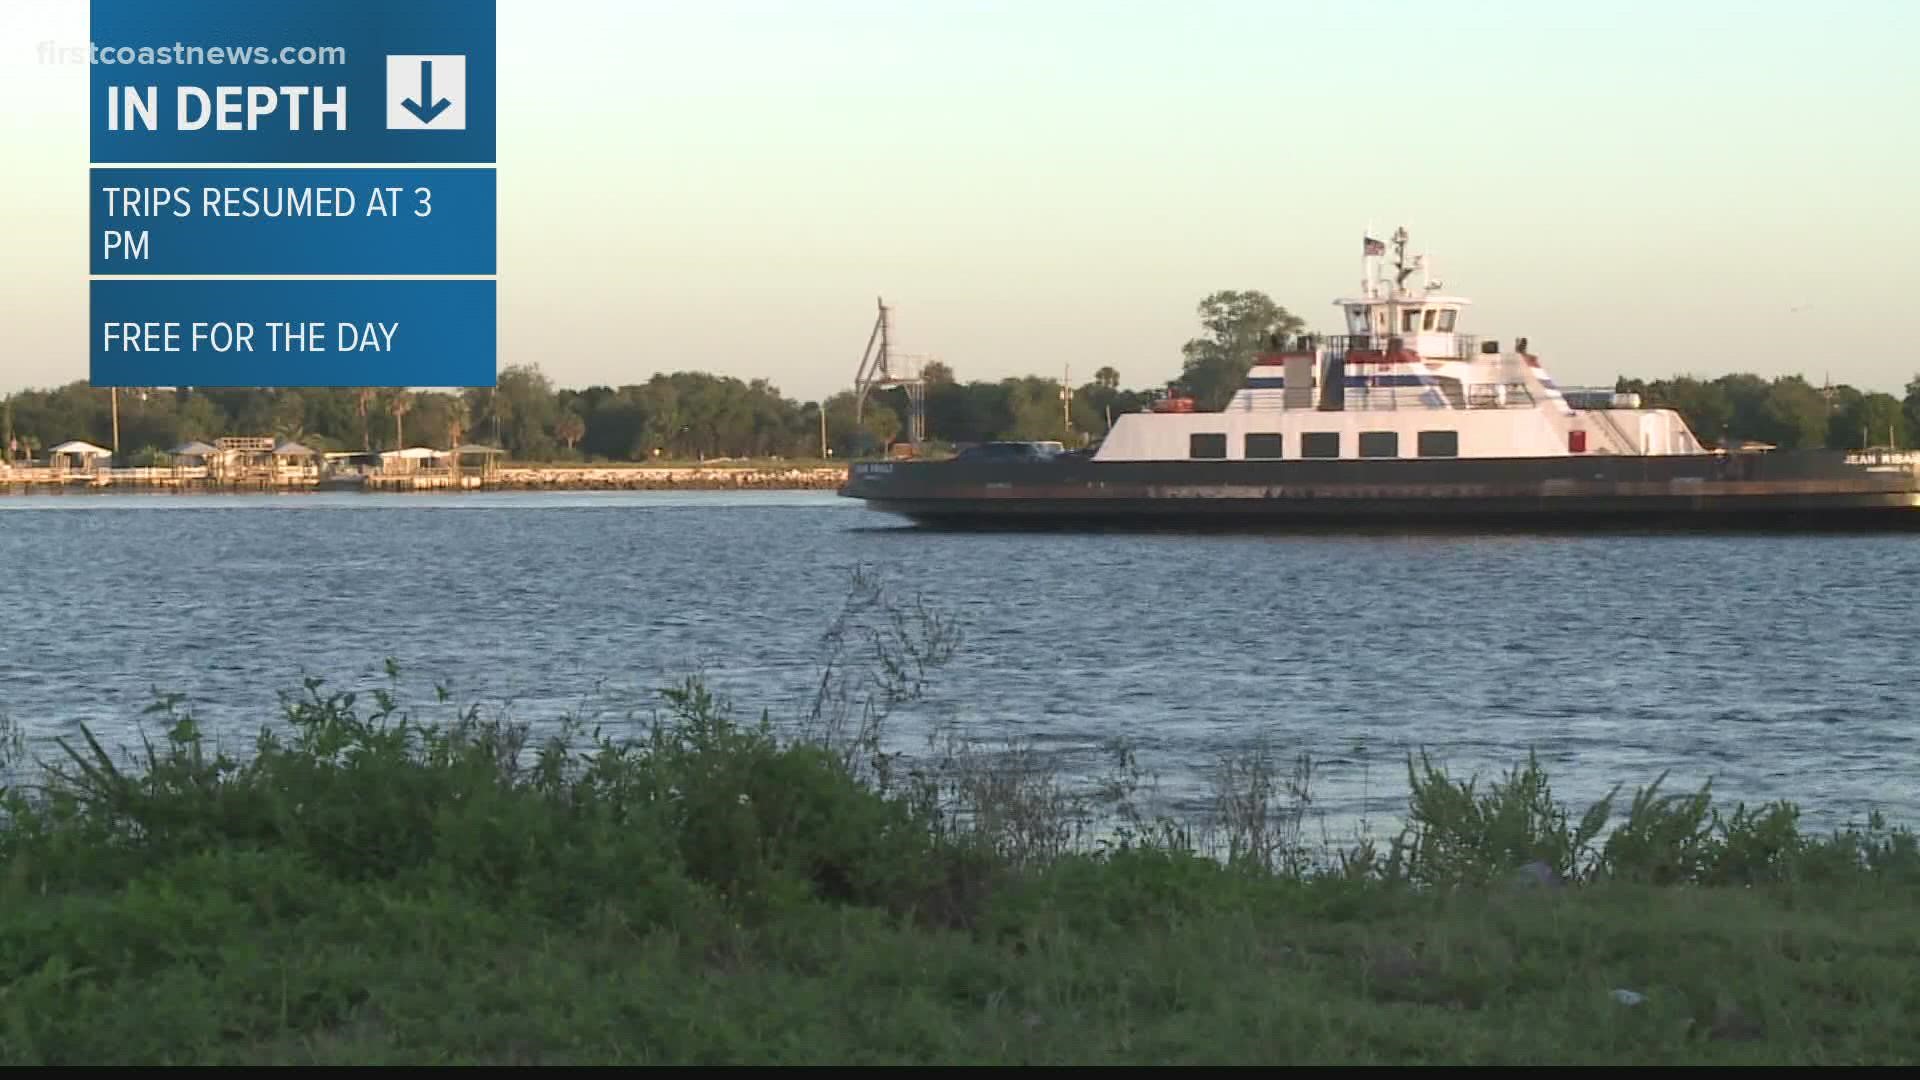 The ferry allowed free trips between 3 p.m. and 7:30 p.m. Tuesday.